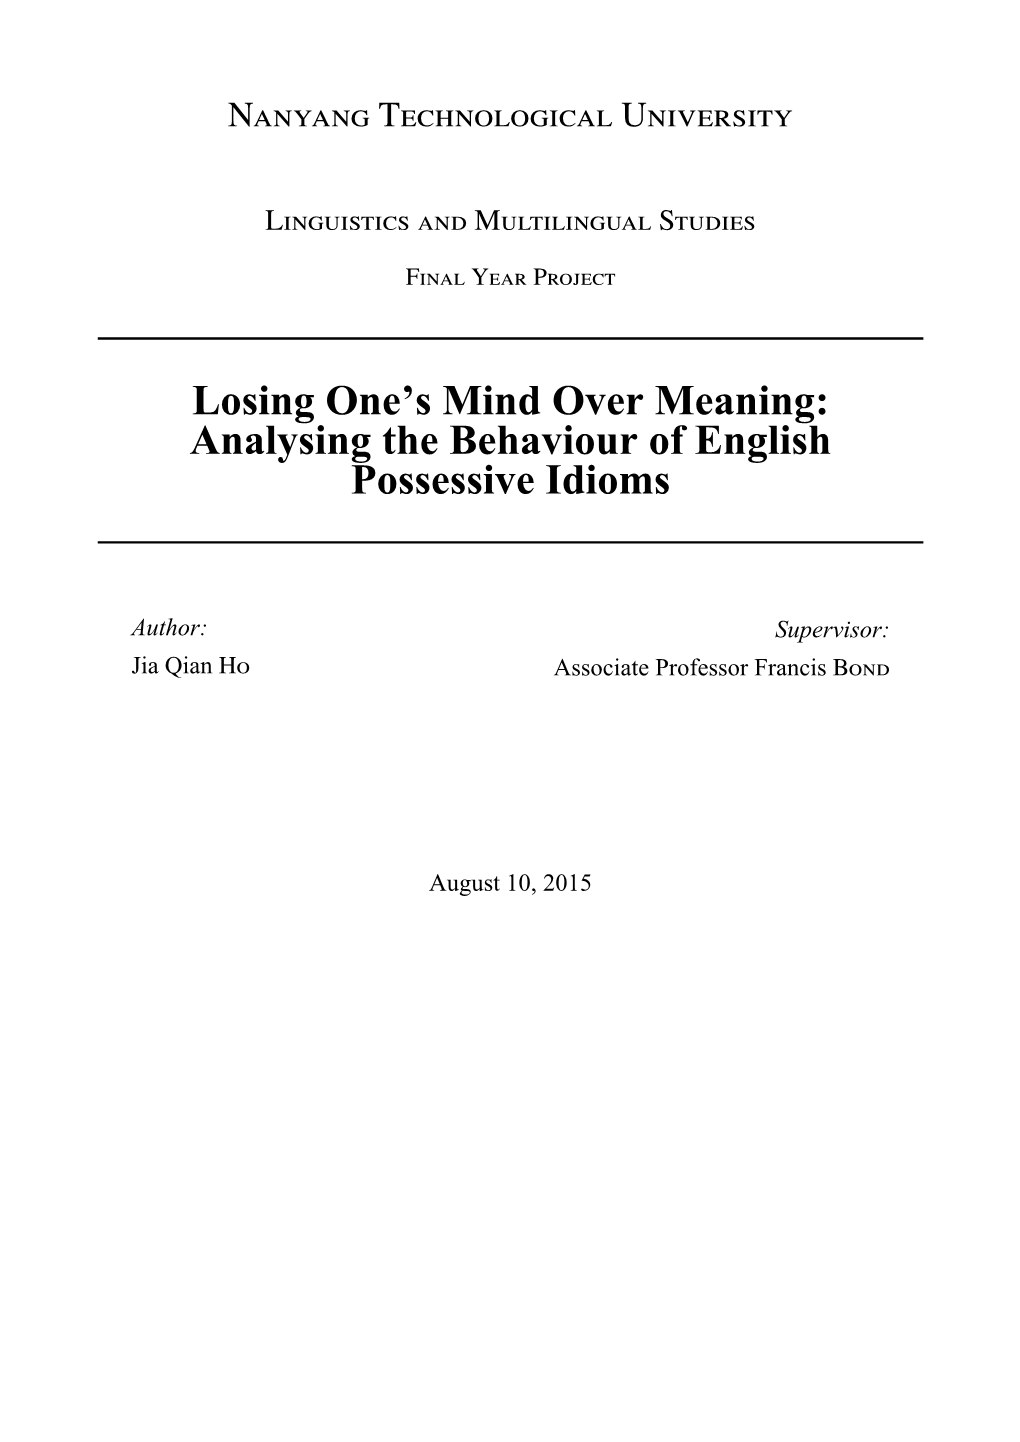 Losing One's Mind Over Meaning: Analysing the Behaviour of English